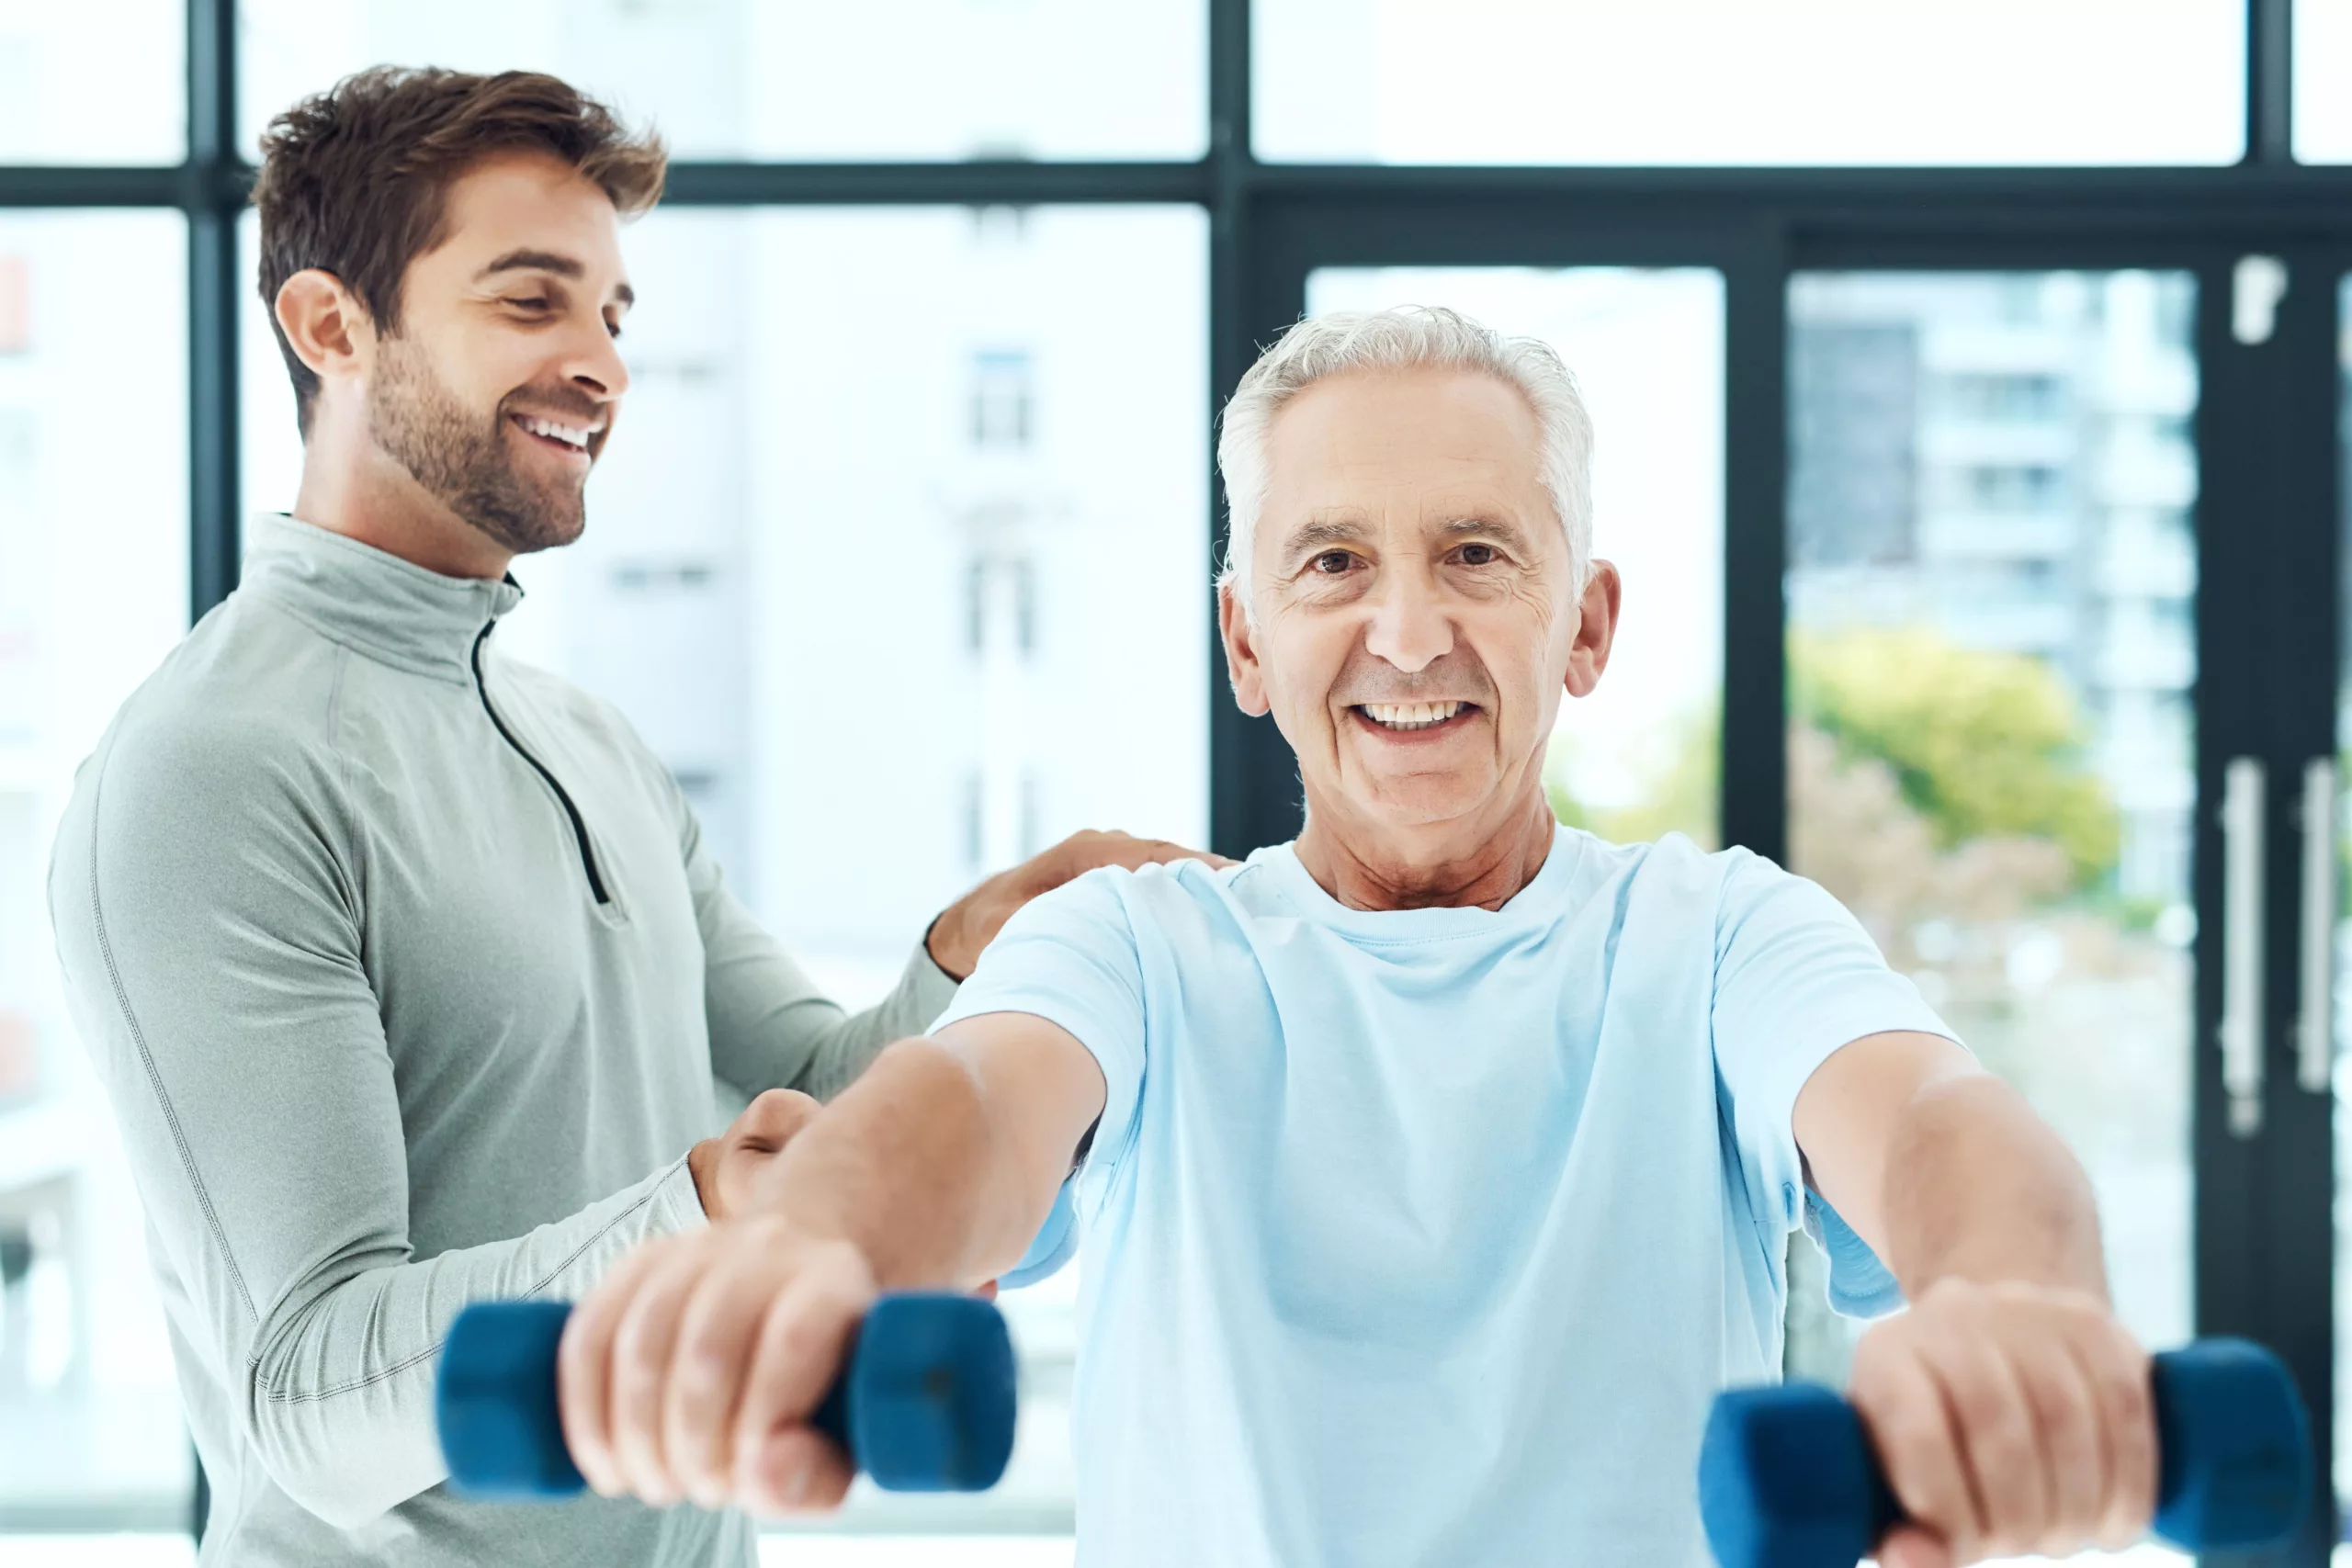 A physiotherapist helping a senior citizen client's posture while lifting dumbbells